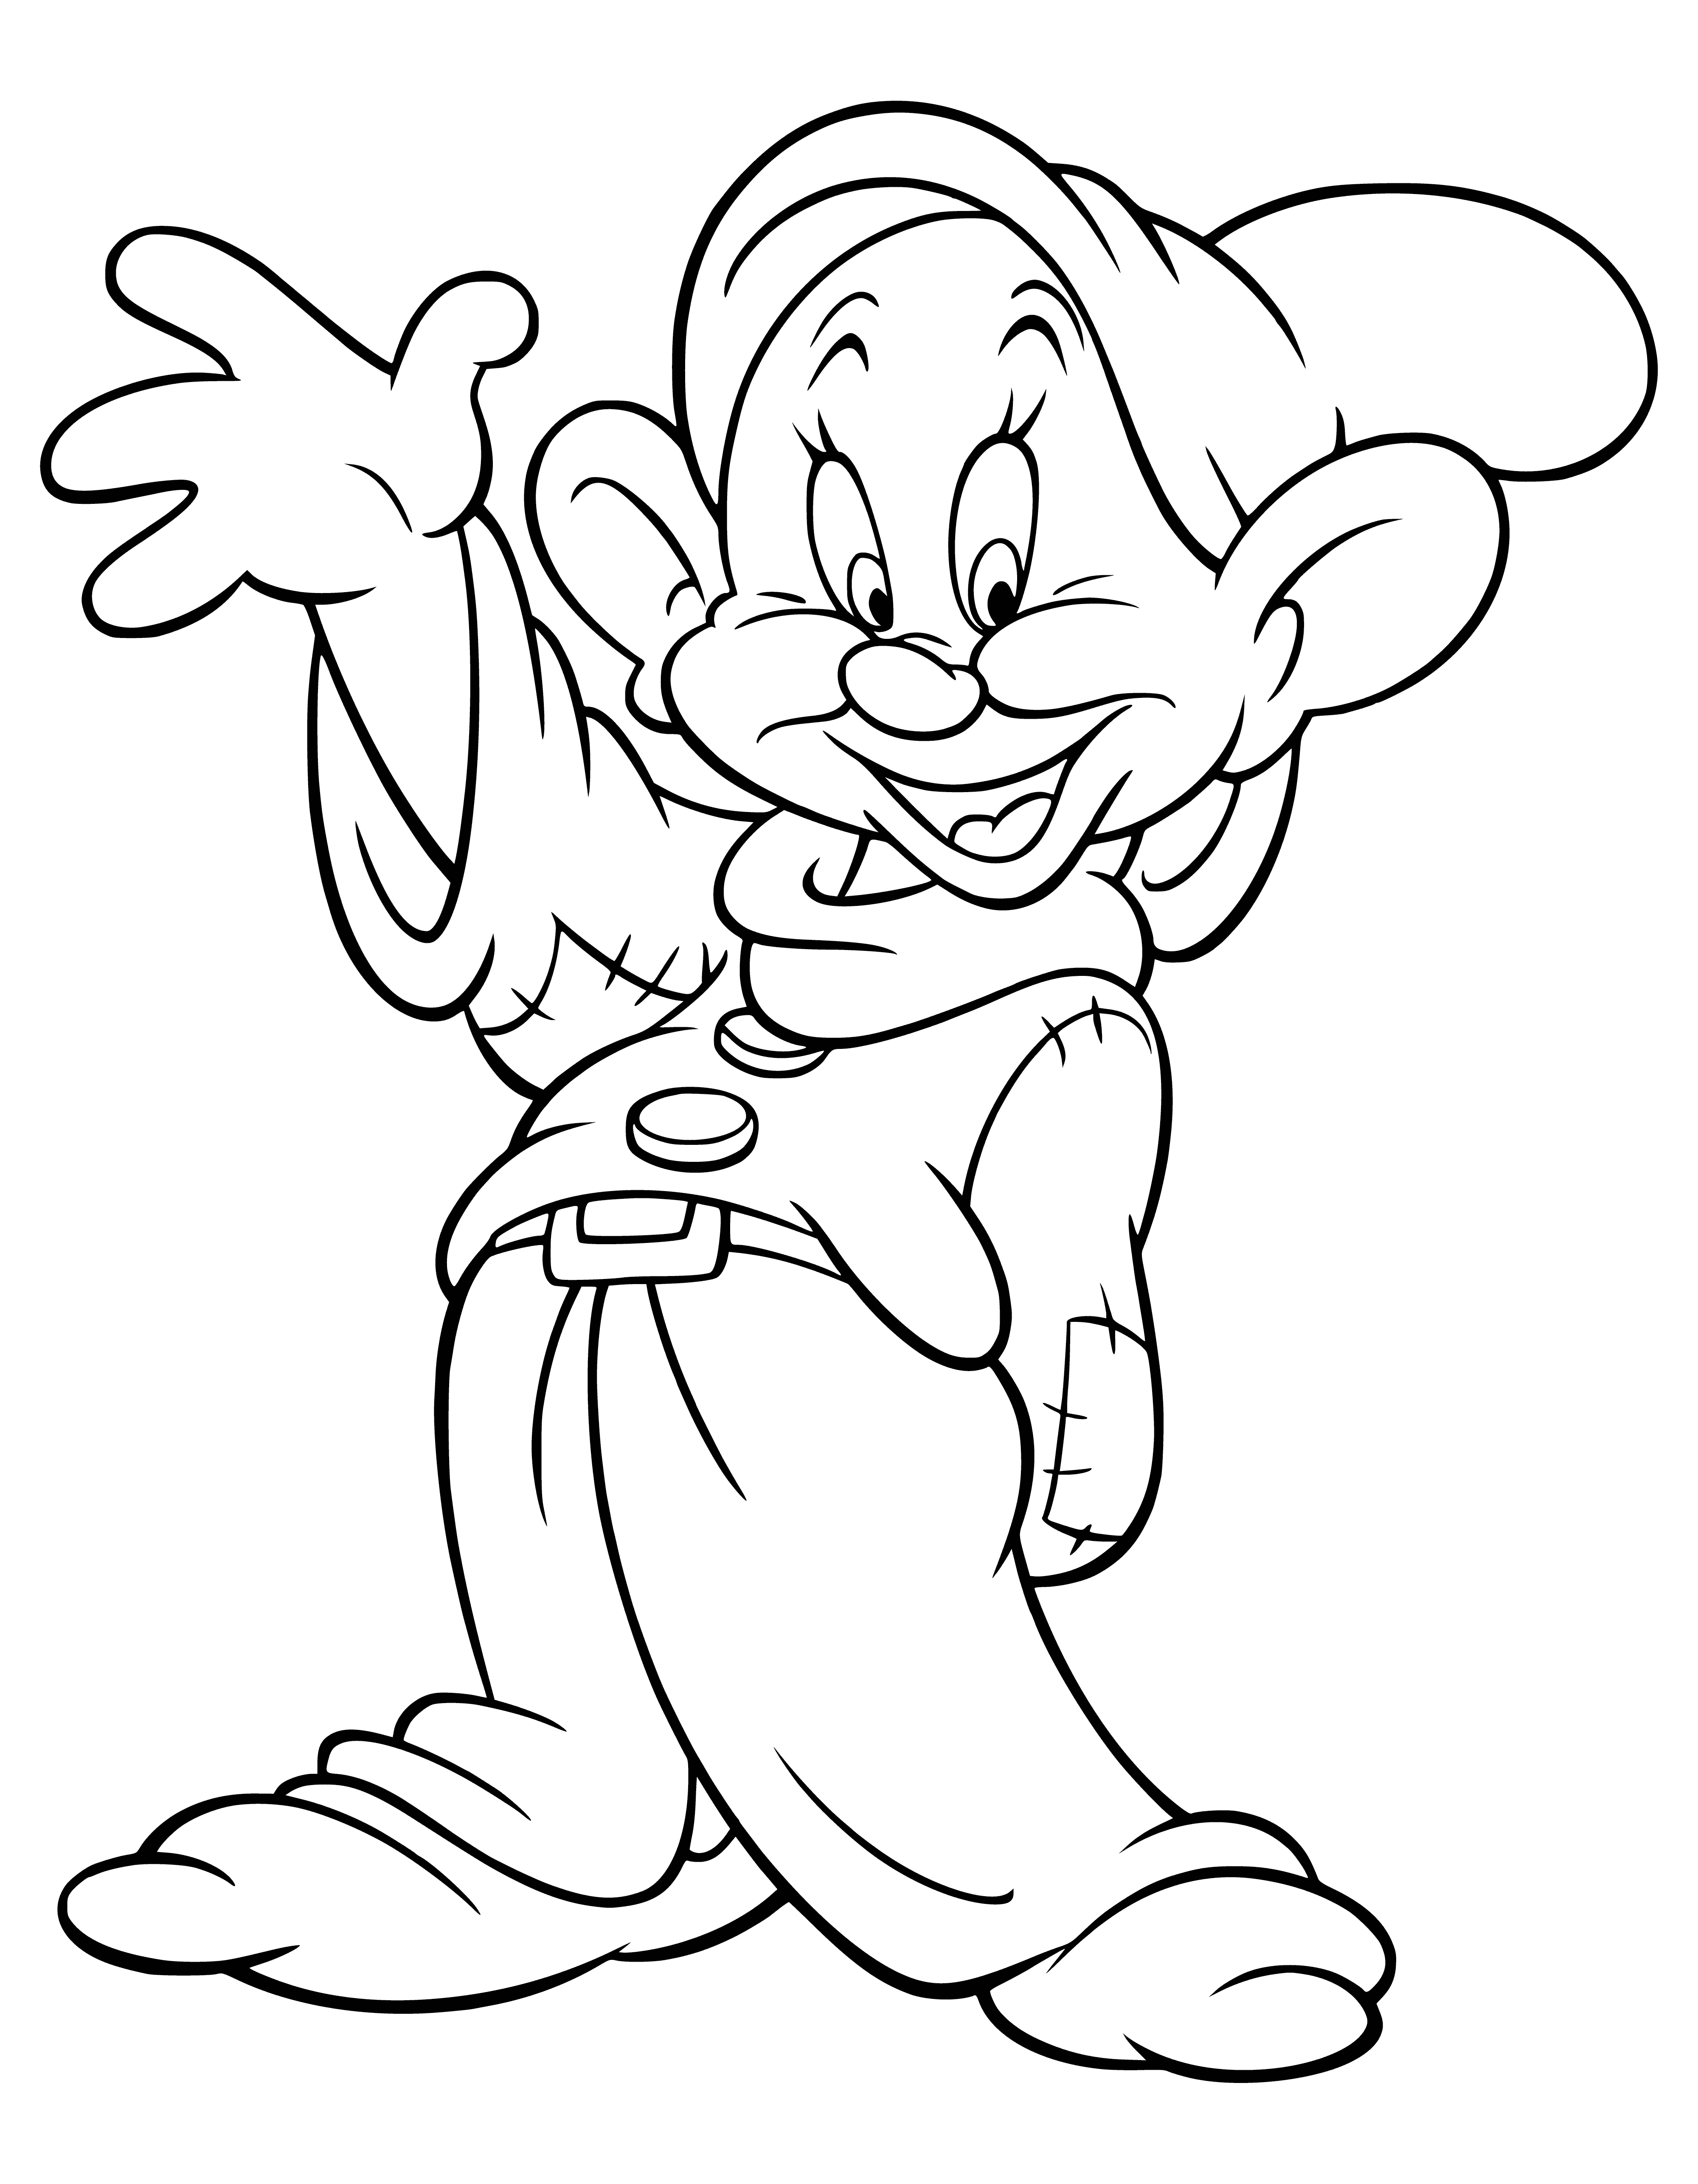 A simpleton coloring page